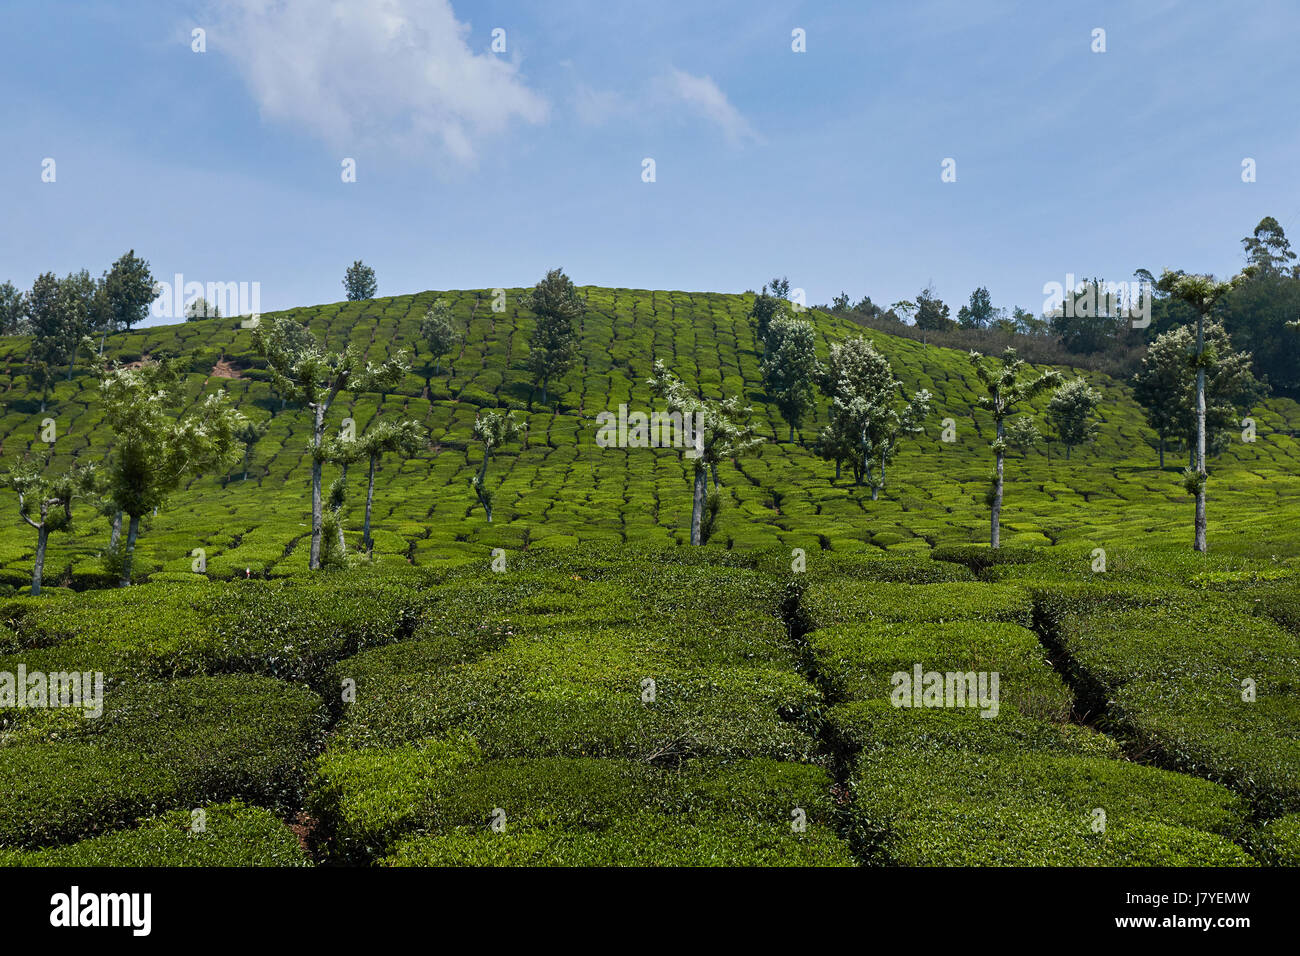 Tea plantations in Munnar, Kerala, South India. Munnar is situated at around 1,600 metres above sea level in the Western Ghats range of mountains. Stock Photo